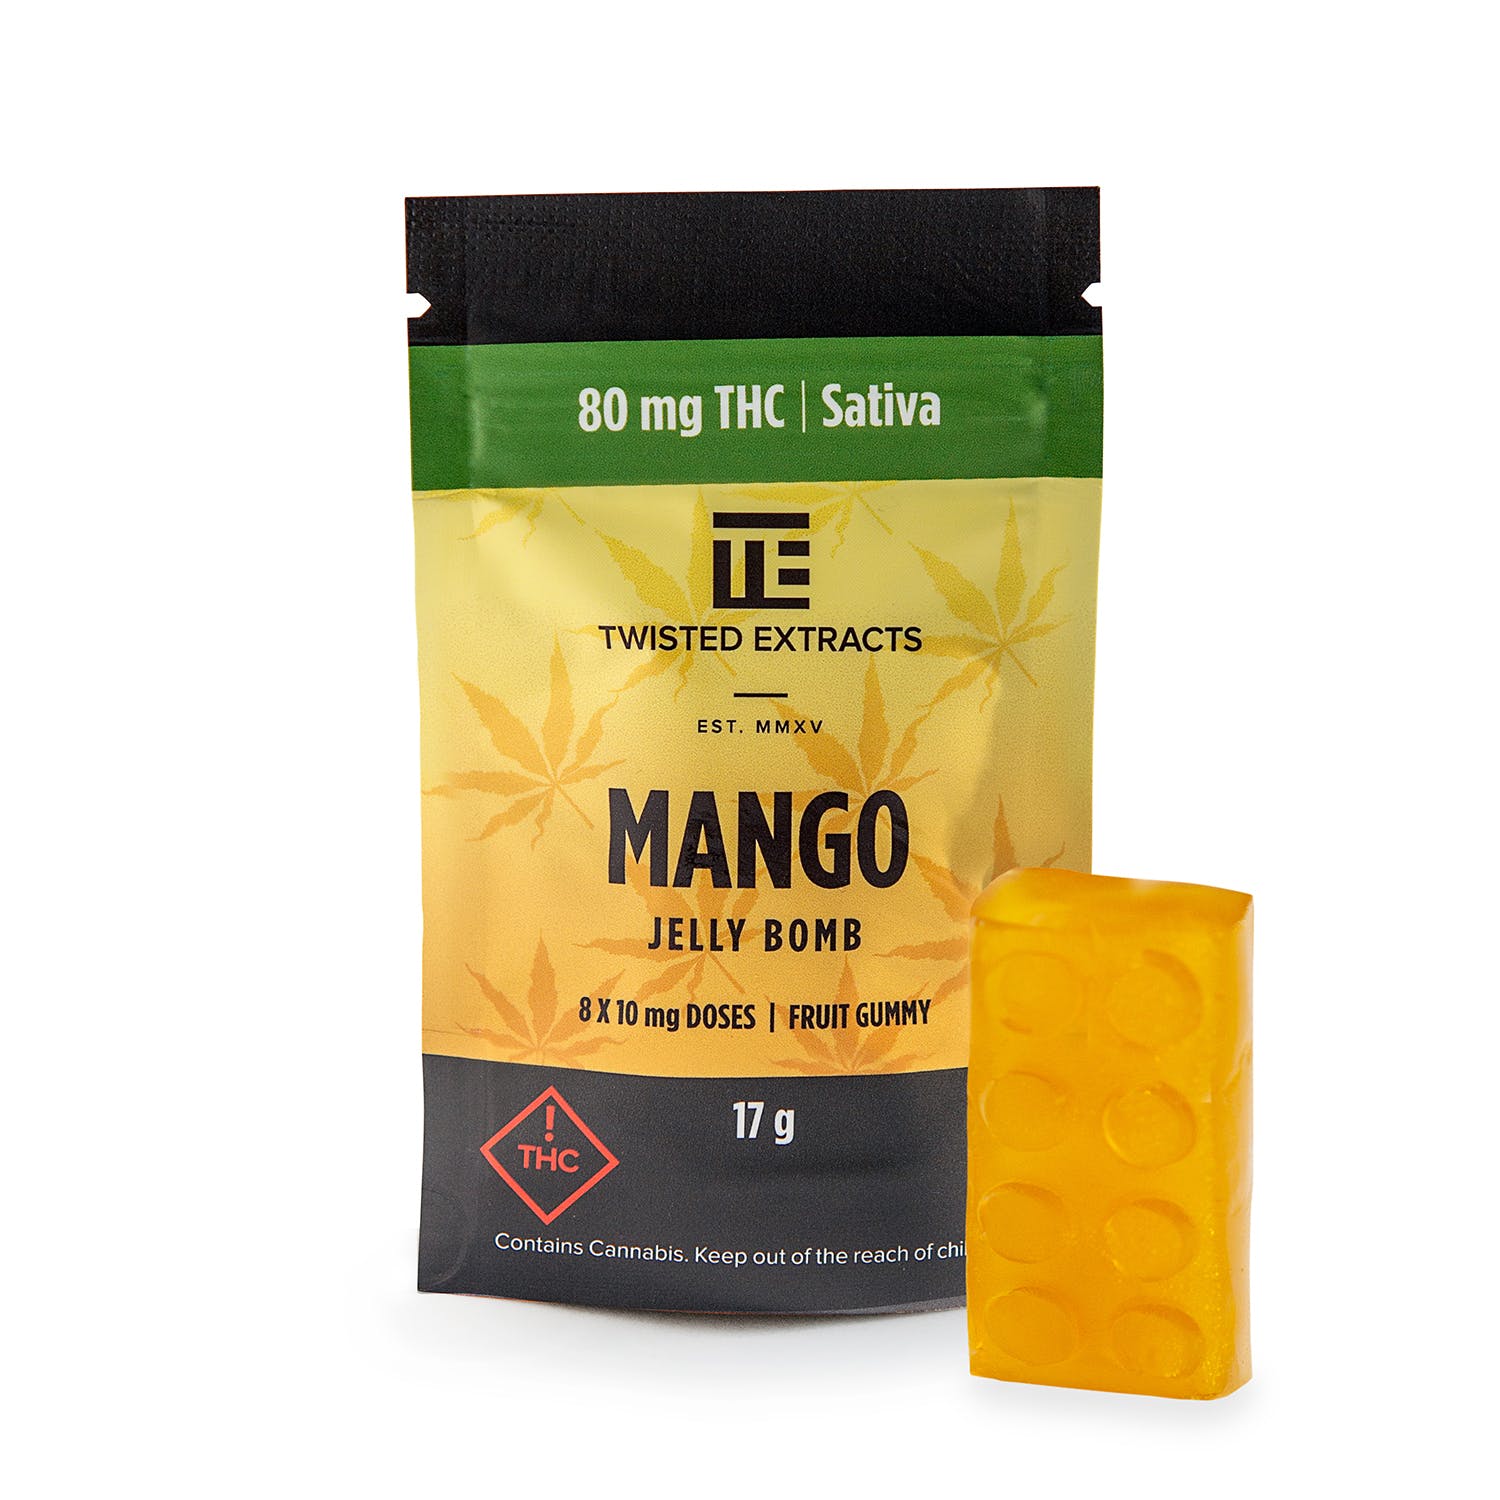 80mg Mango Bombs by Twisted Extracts